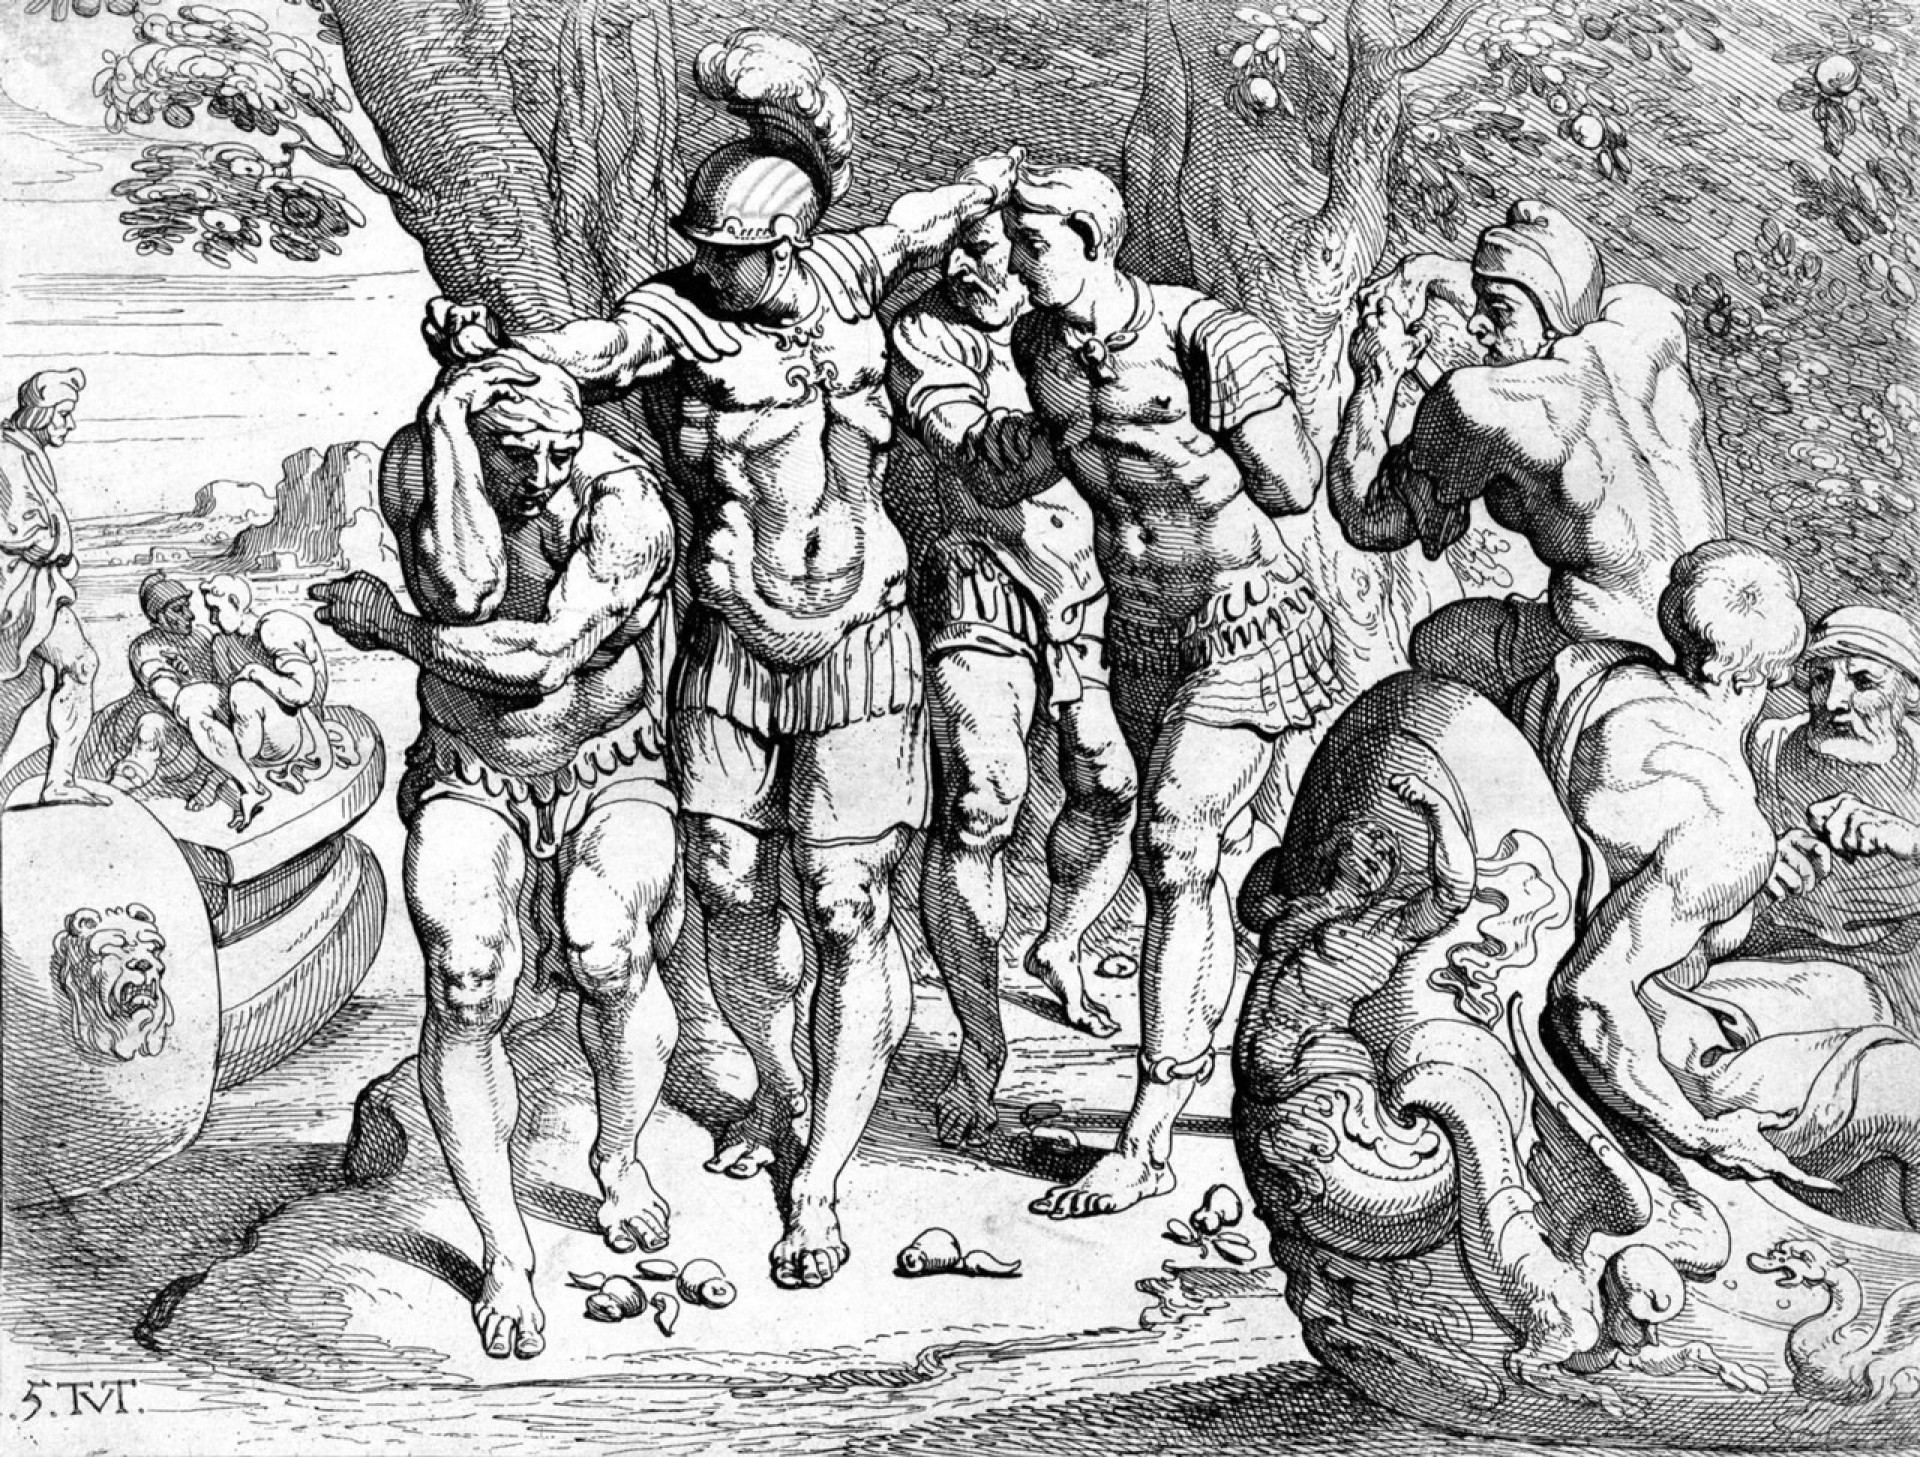 <p>Odysseus sent a reconnaissance party to explore the island, but these men, upon eating the lotus, lost all desire to return home. Realizing the danger, Odysseus forcibly retrieved his men and set sail immediately.</p><p>You may also like:<a href="https://www.starsinsider.com/n/261529?utm_source=msn.com&utm_medium=display&utm_campaign=referral_description&utm_content=739826en-us"> Environmentally destructive foods we all consume</a></p>